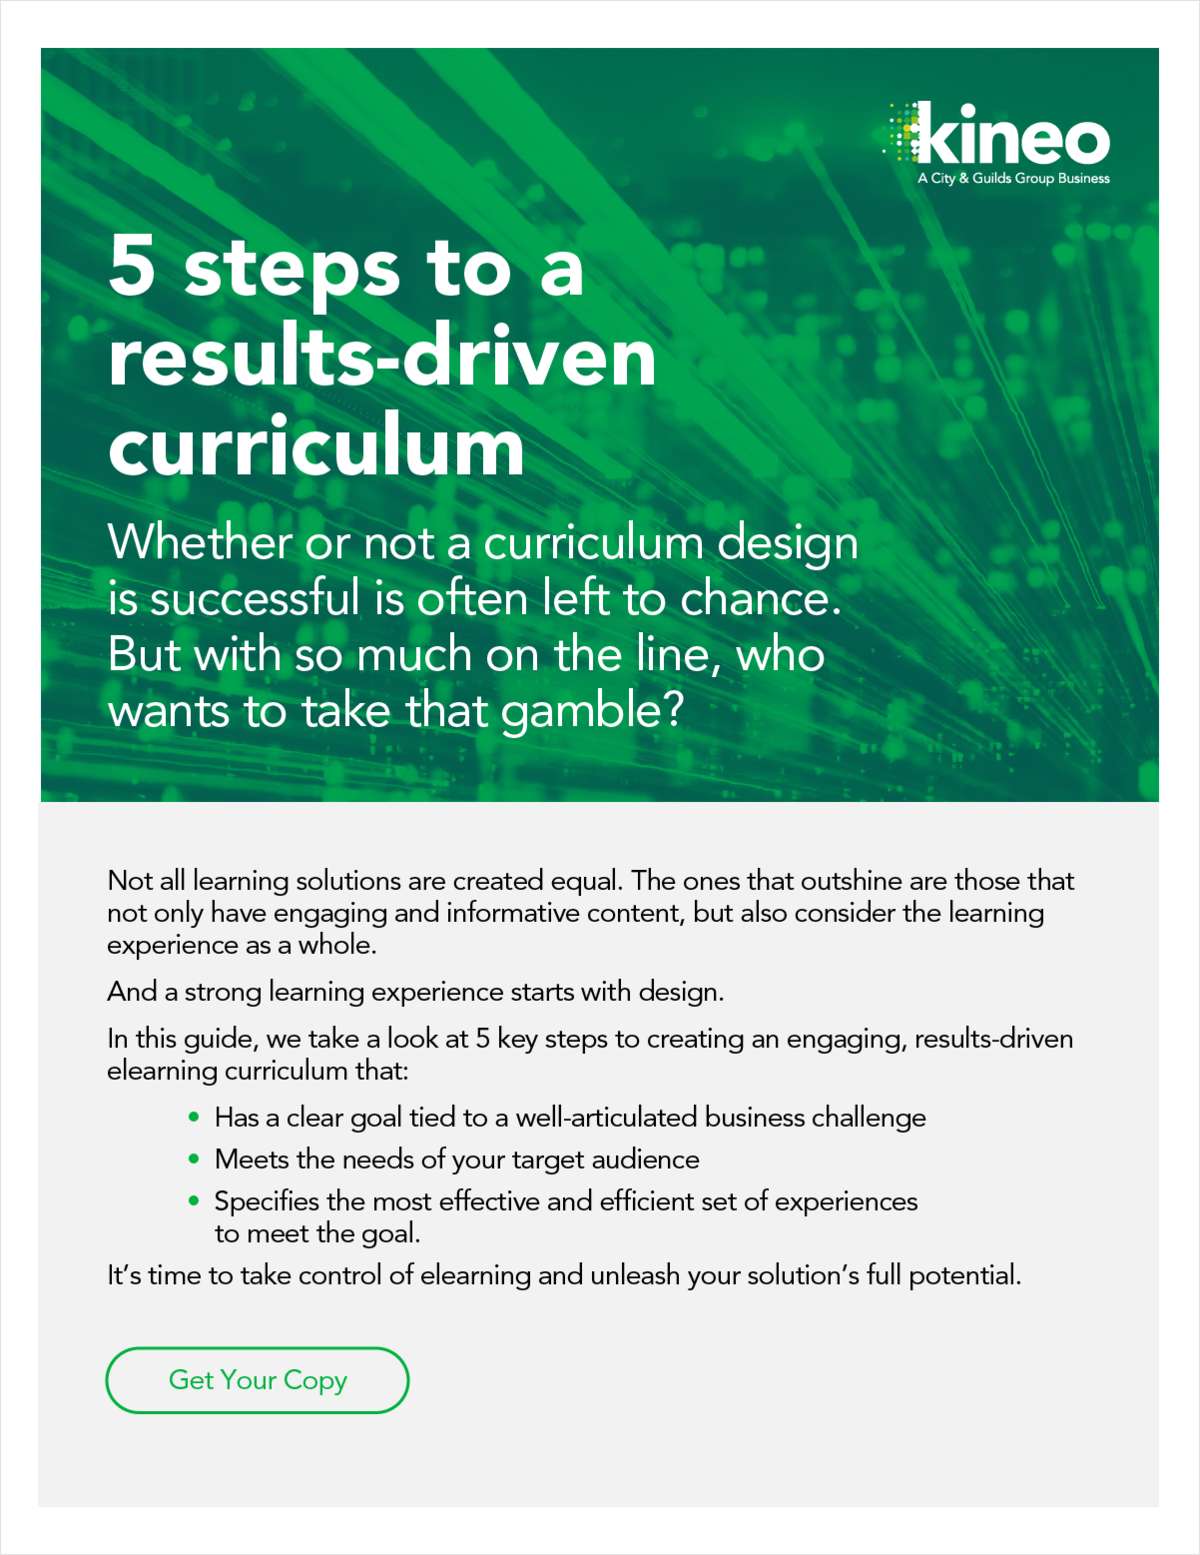 5 Steps to a Results-Driven Learning Curriculum